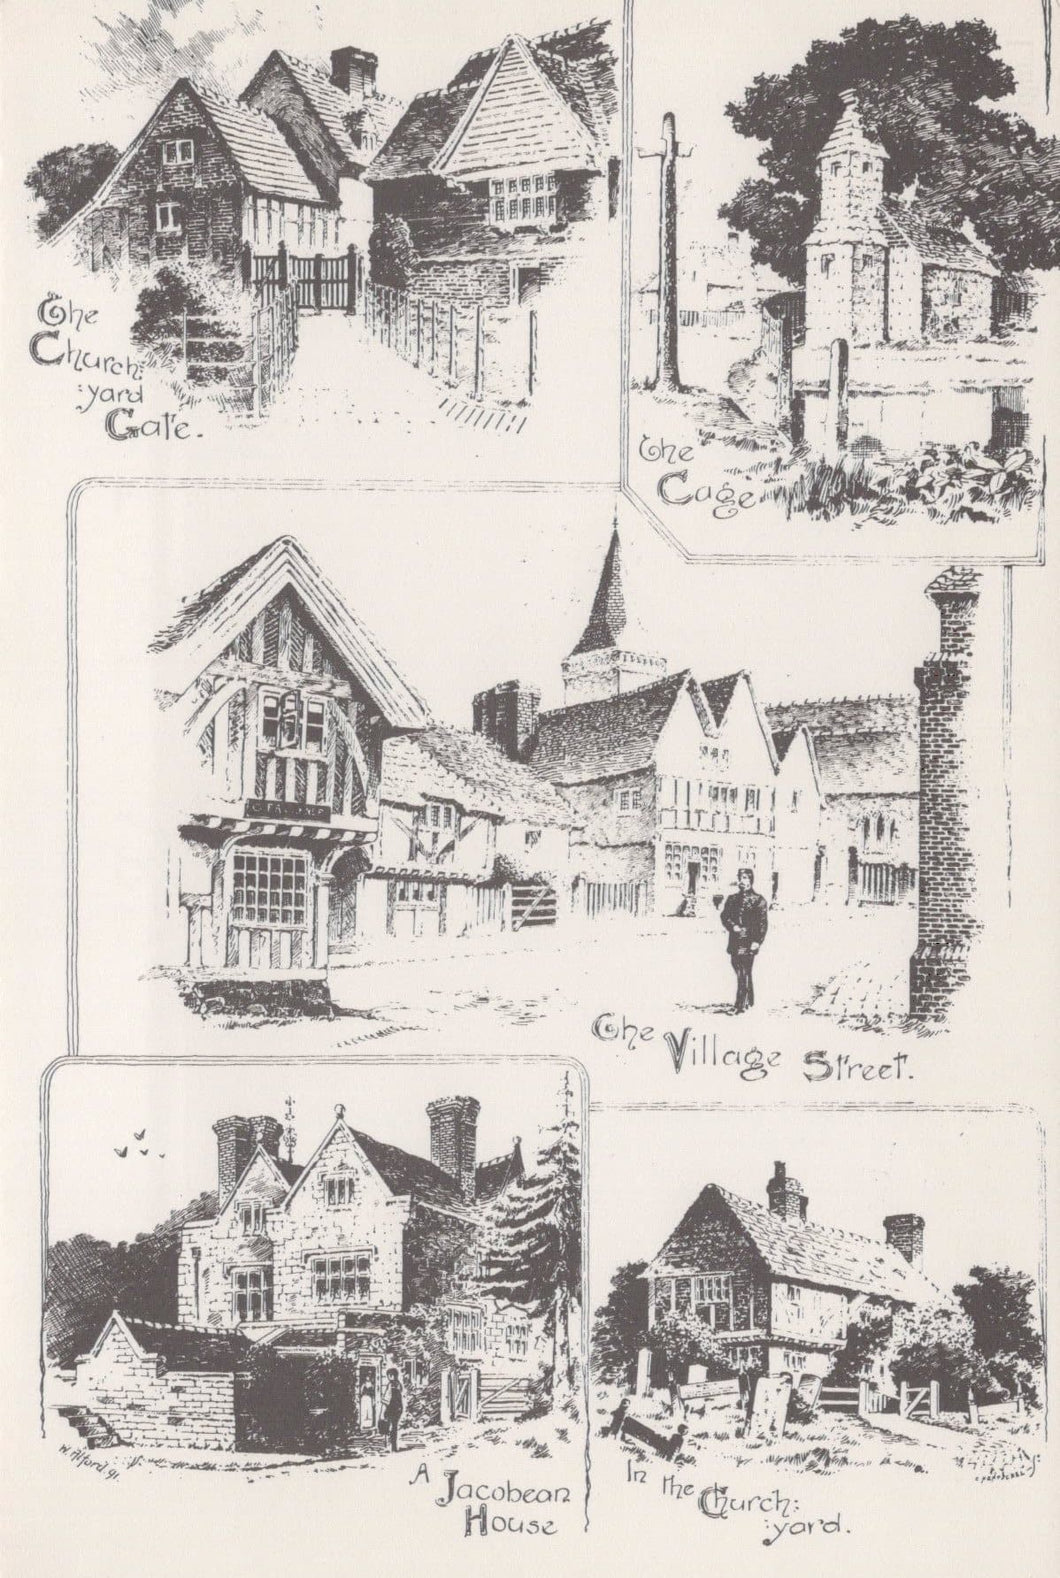 Surrey Postcard - Pencil Sketch Showing Views of Lingfield in The 1890's - Mo’s Postcards 